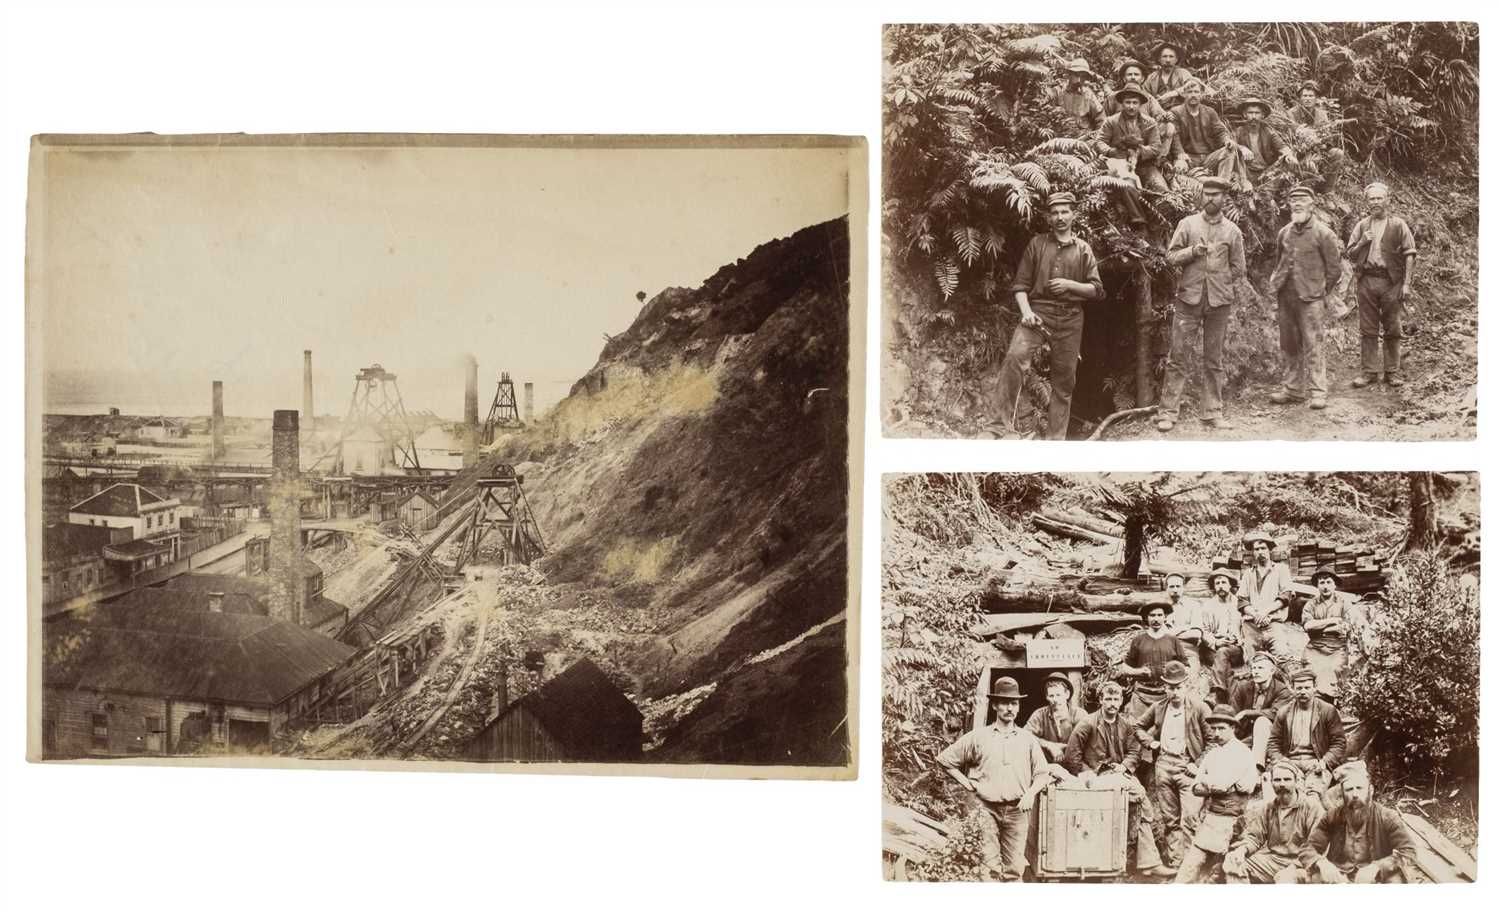 Lot 80 - New Zealand.  A pair of group portrait photographs of miners posing near mine entrances, 1890s